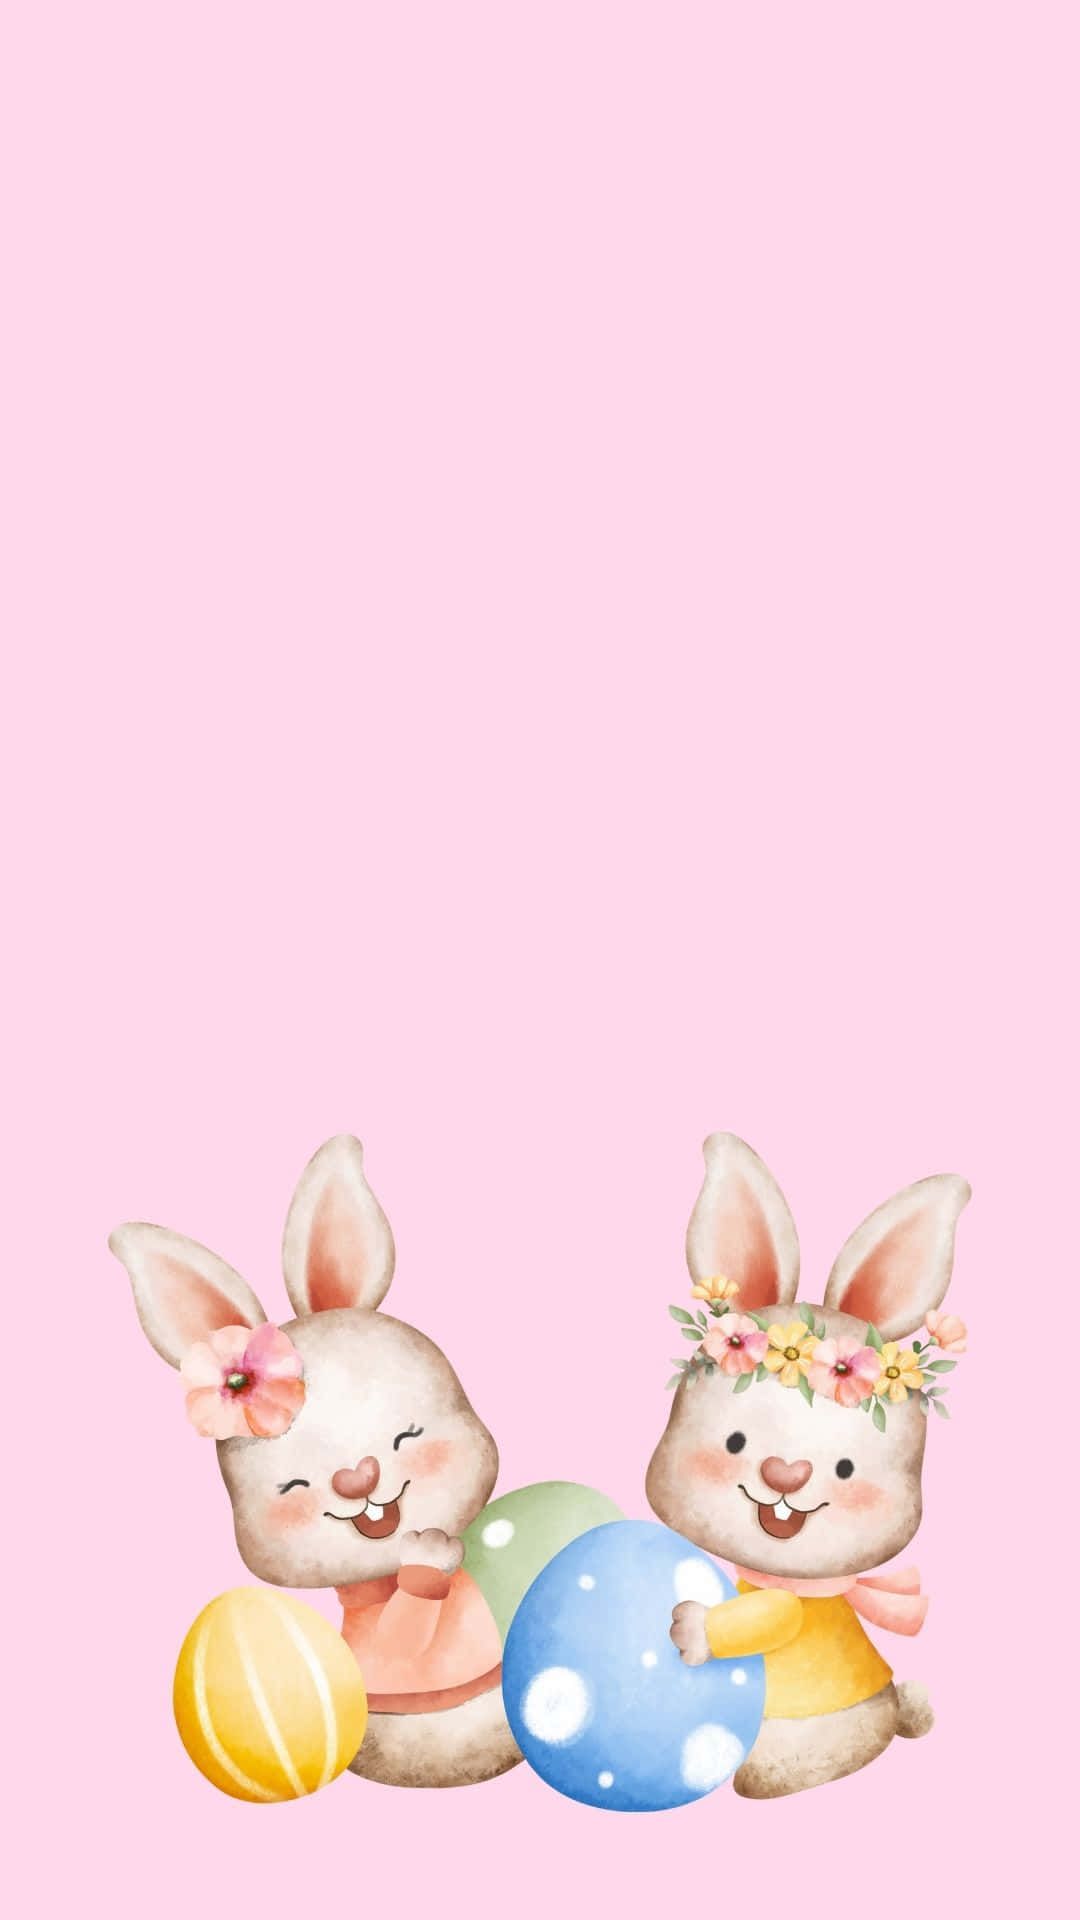 Celebrate Easter With The Easter Bunny! Background